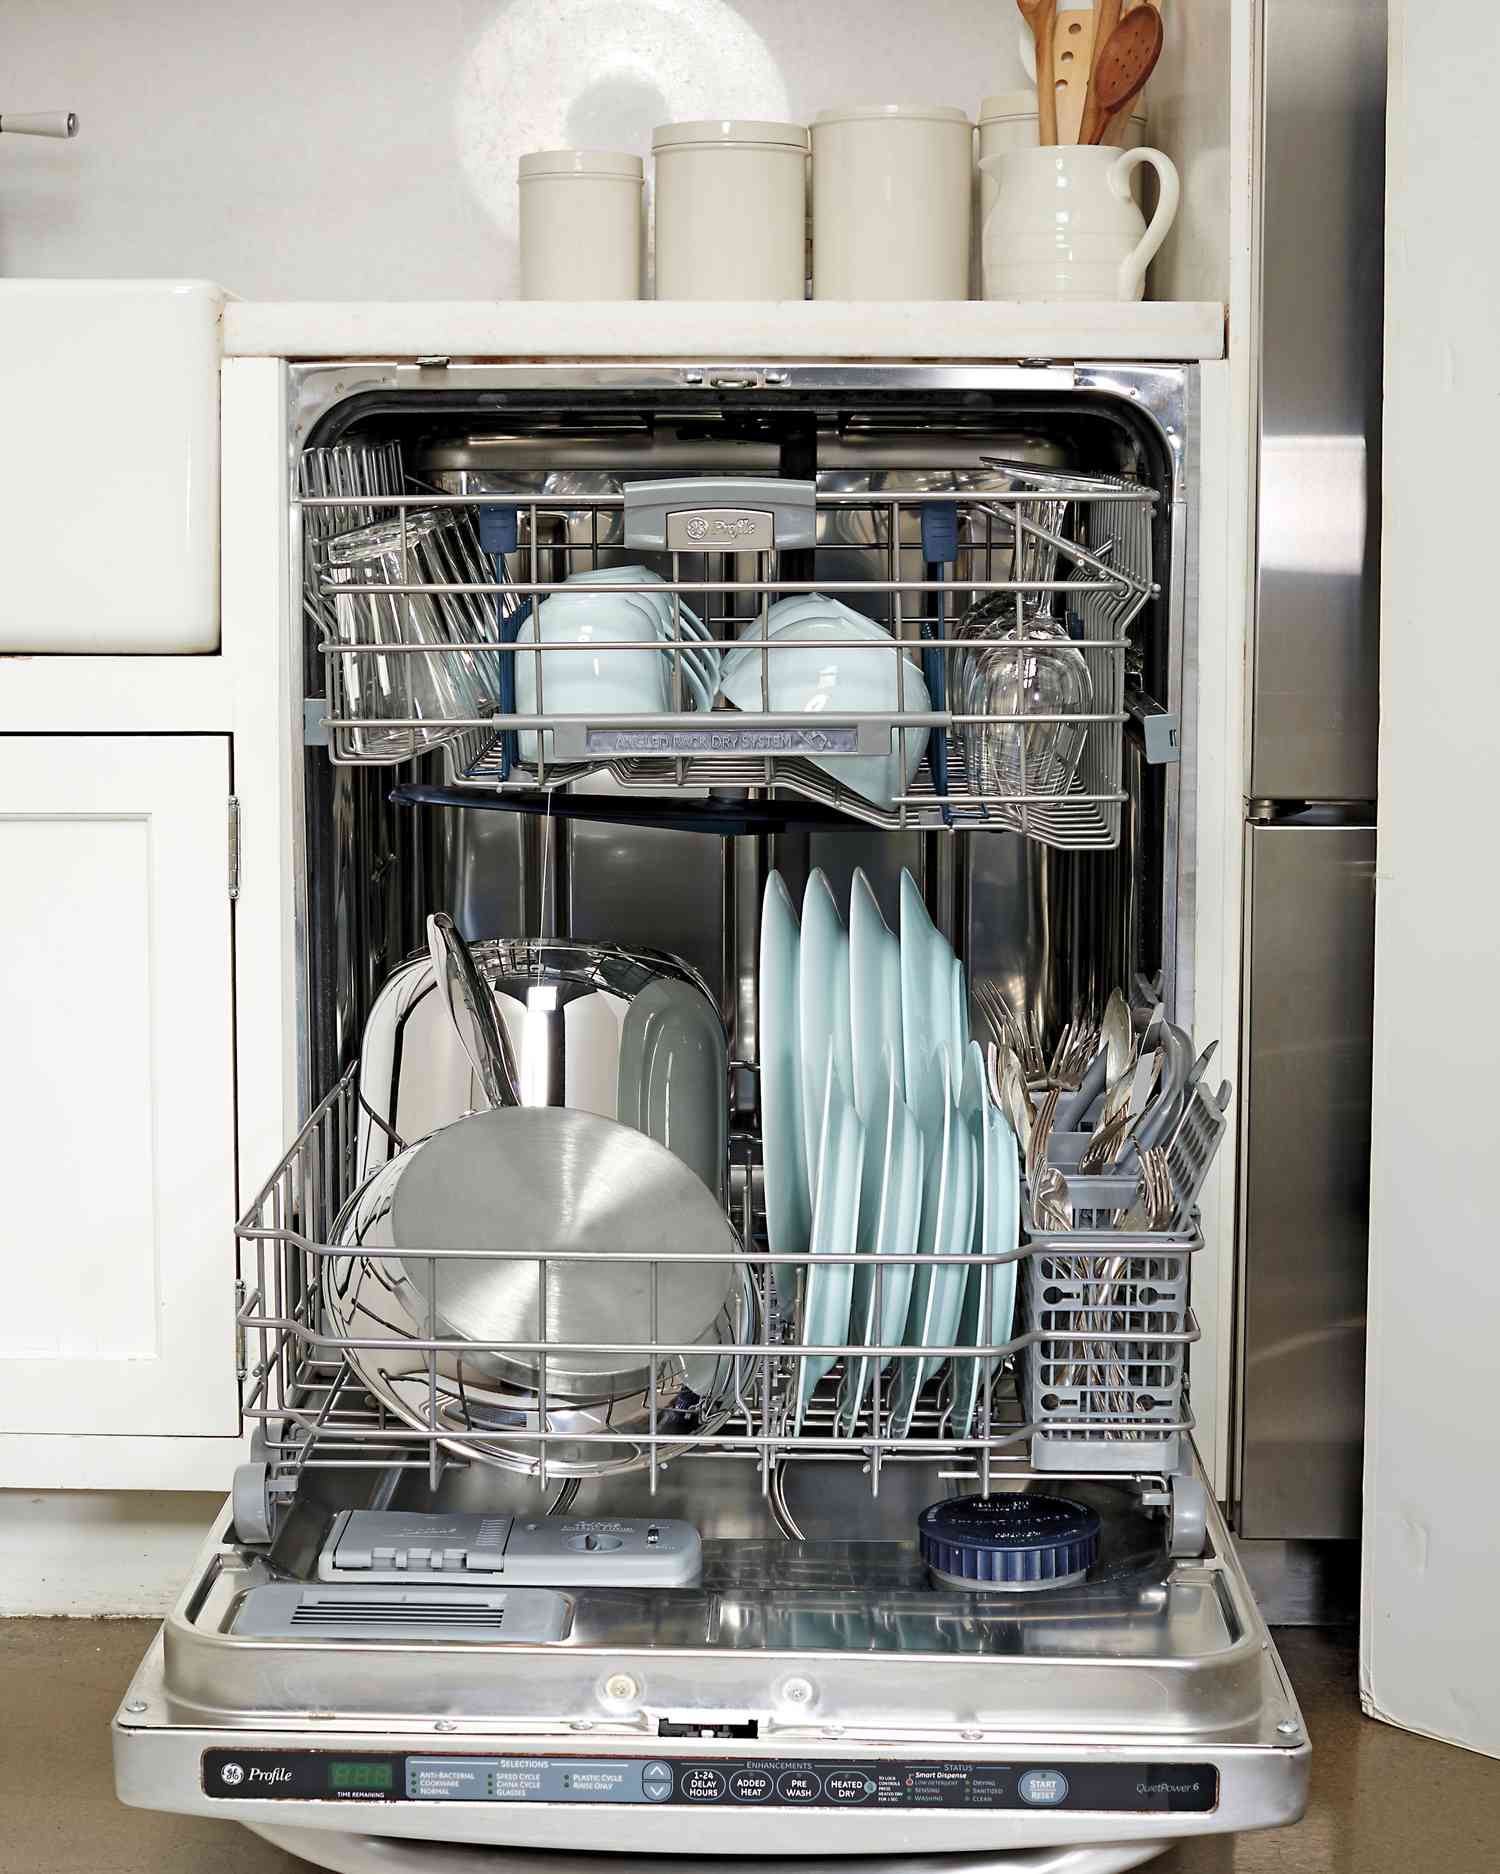 How to Deep-Clean a Kitchen Range